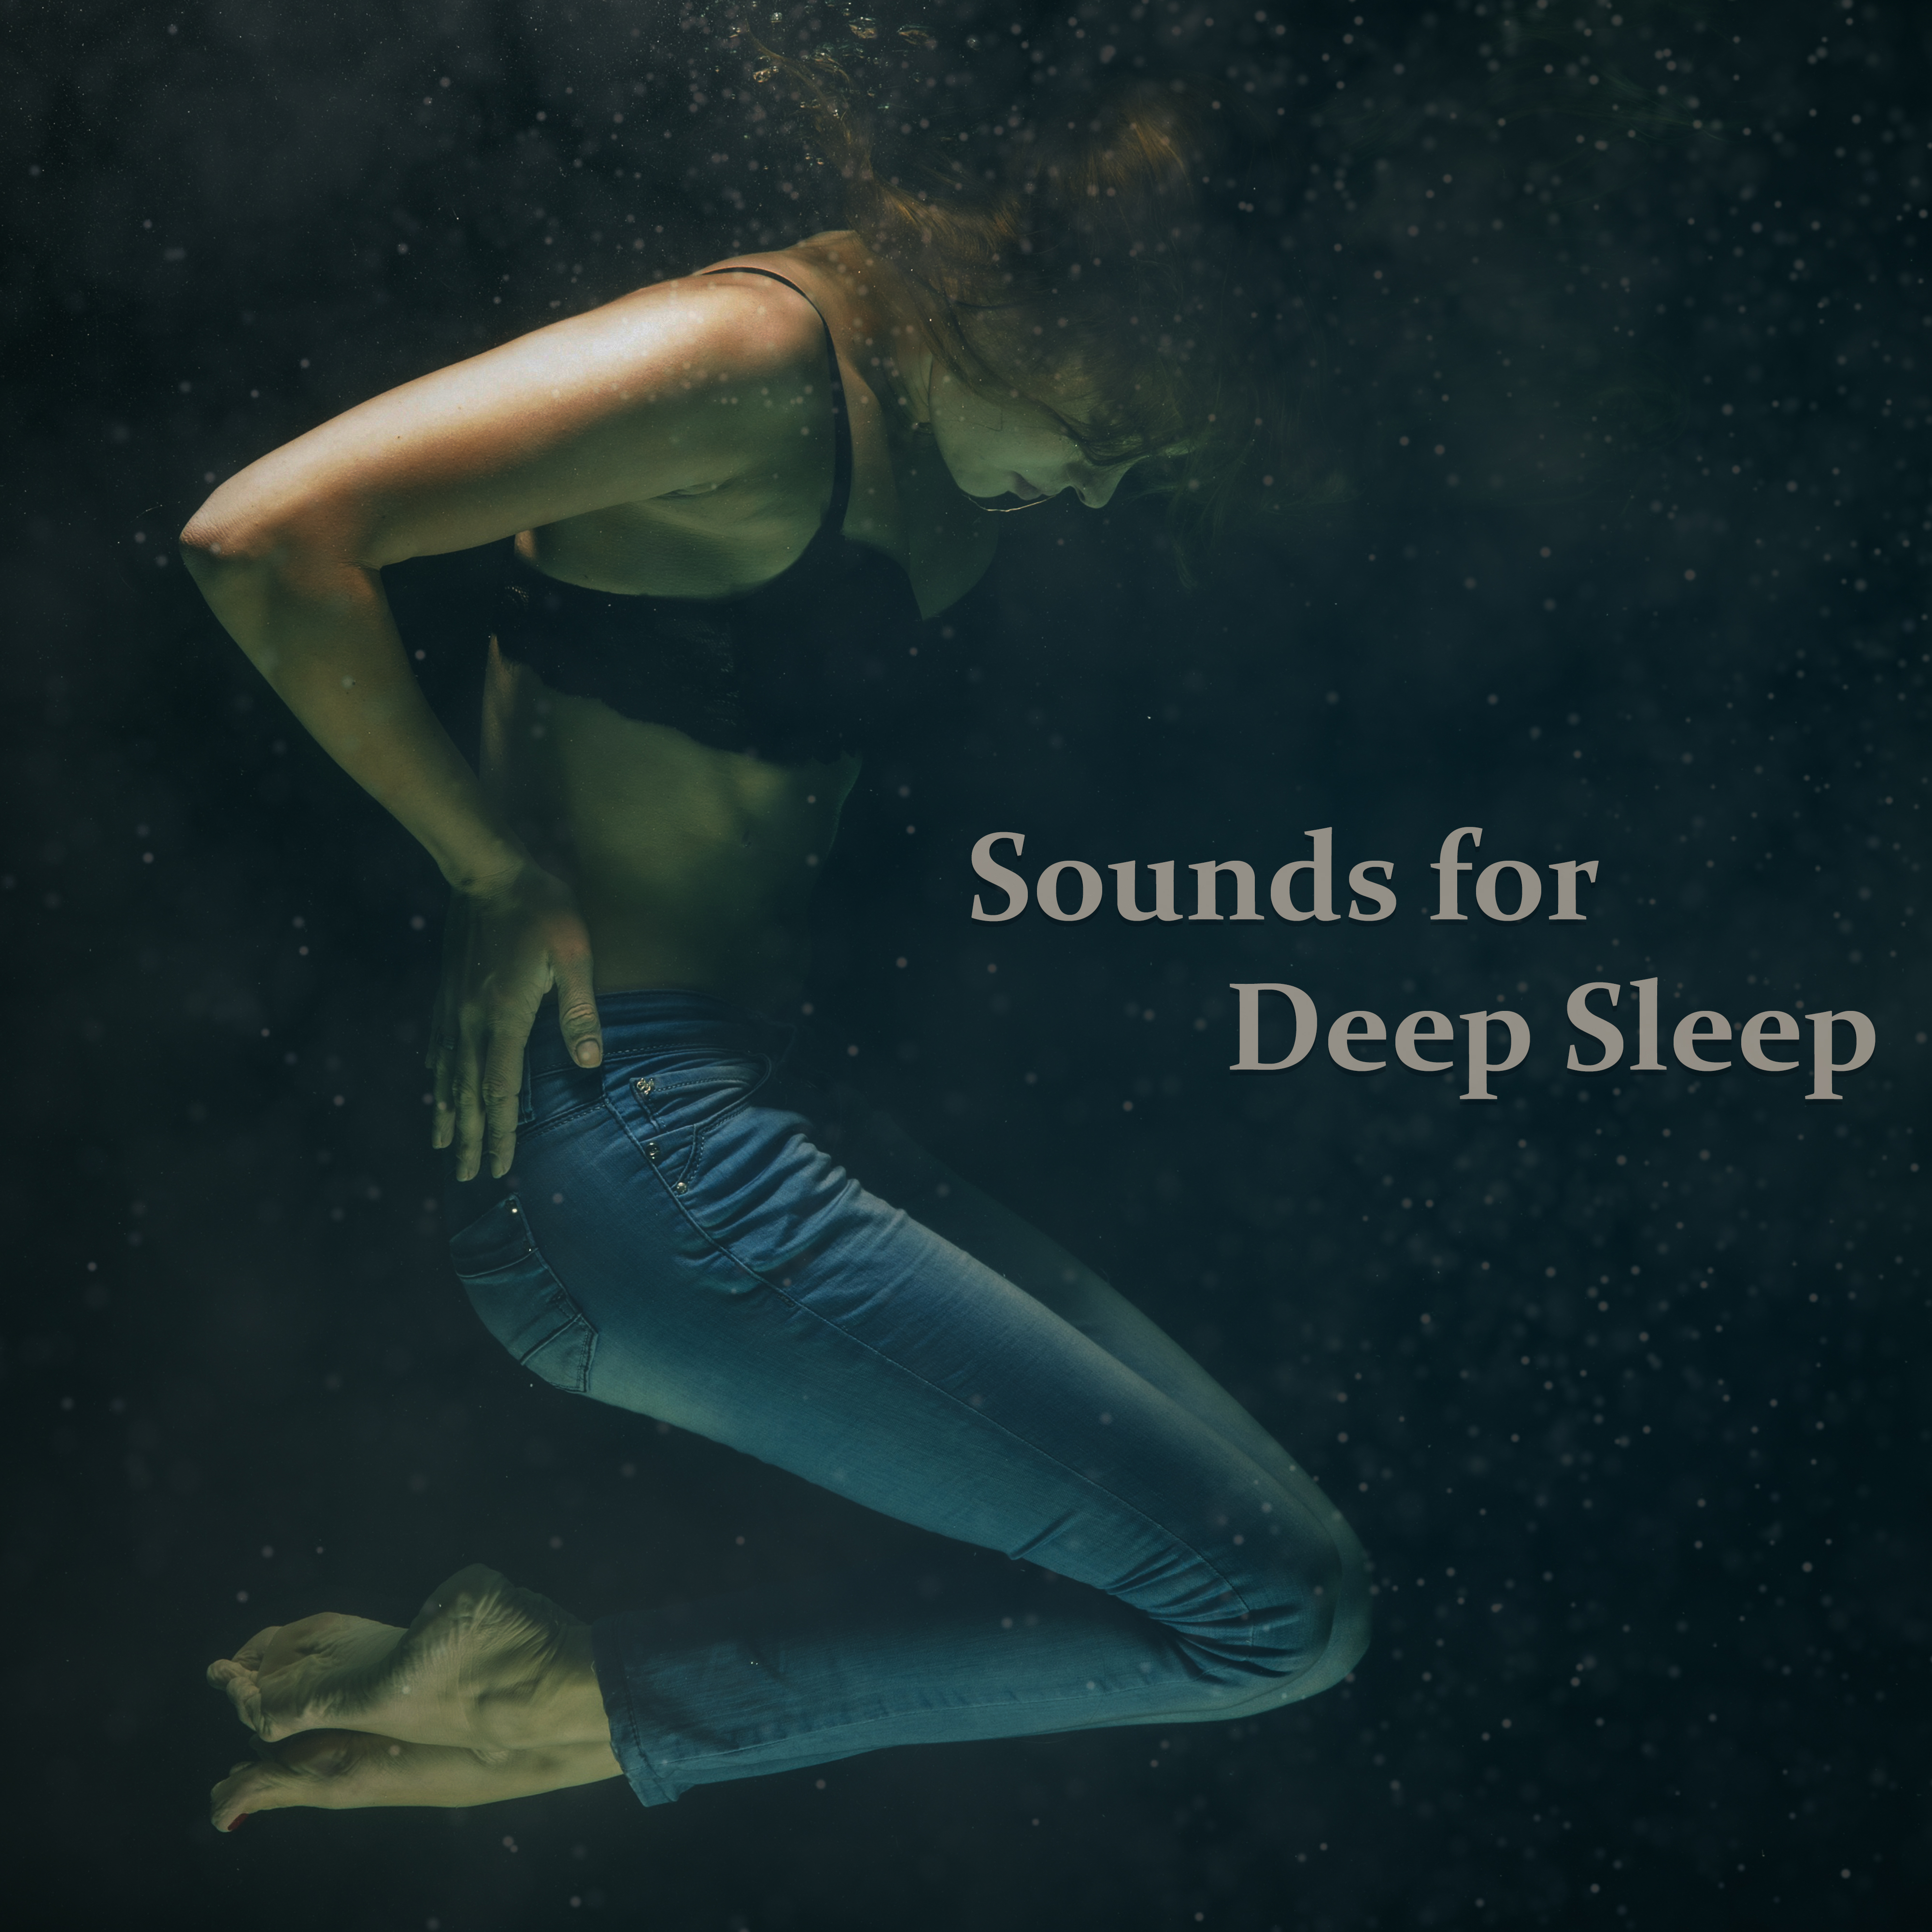 Sounds for Deep Sleep – Sleep Well, Dreaming All Night, New Age for Relaxation, Rest a Bit